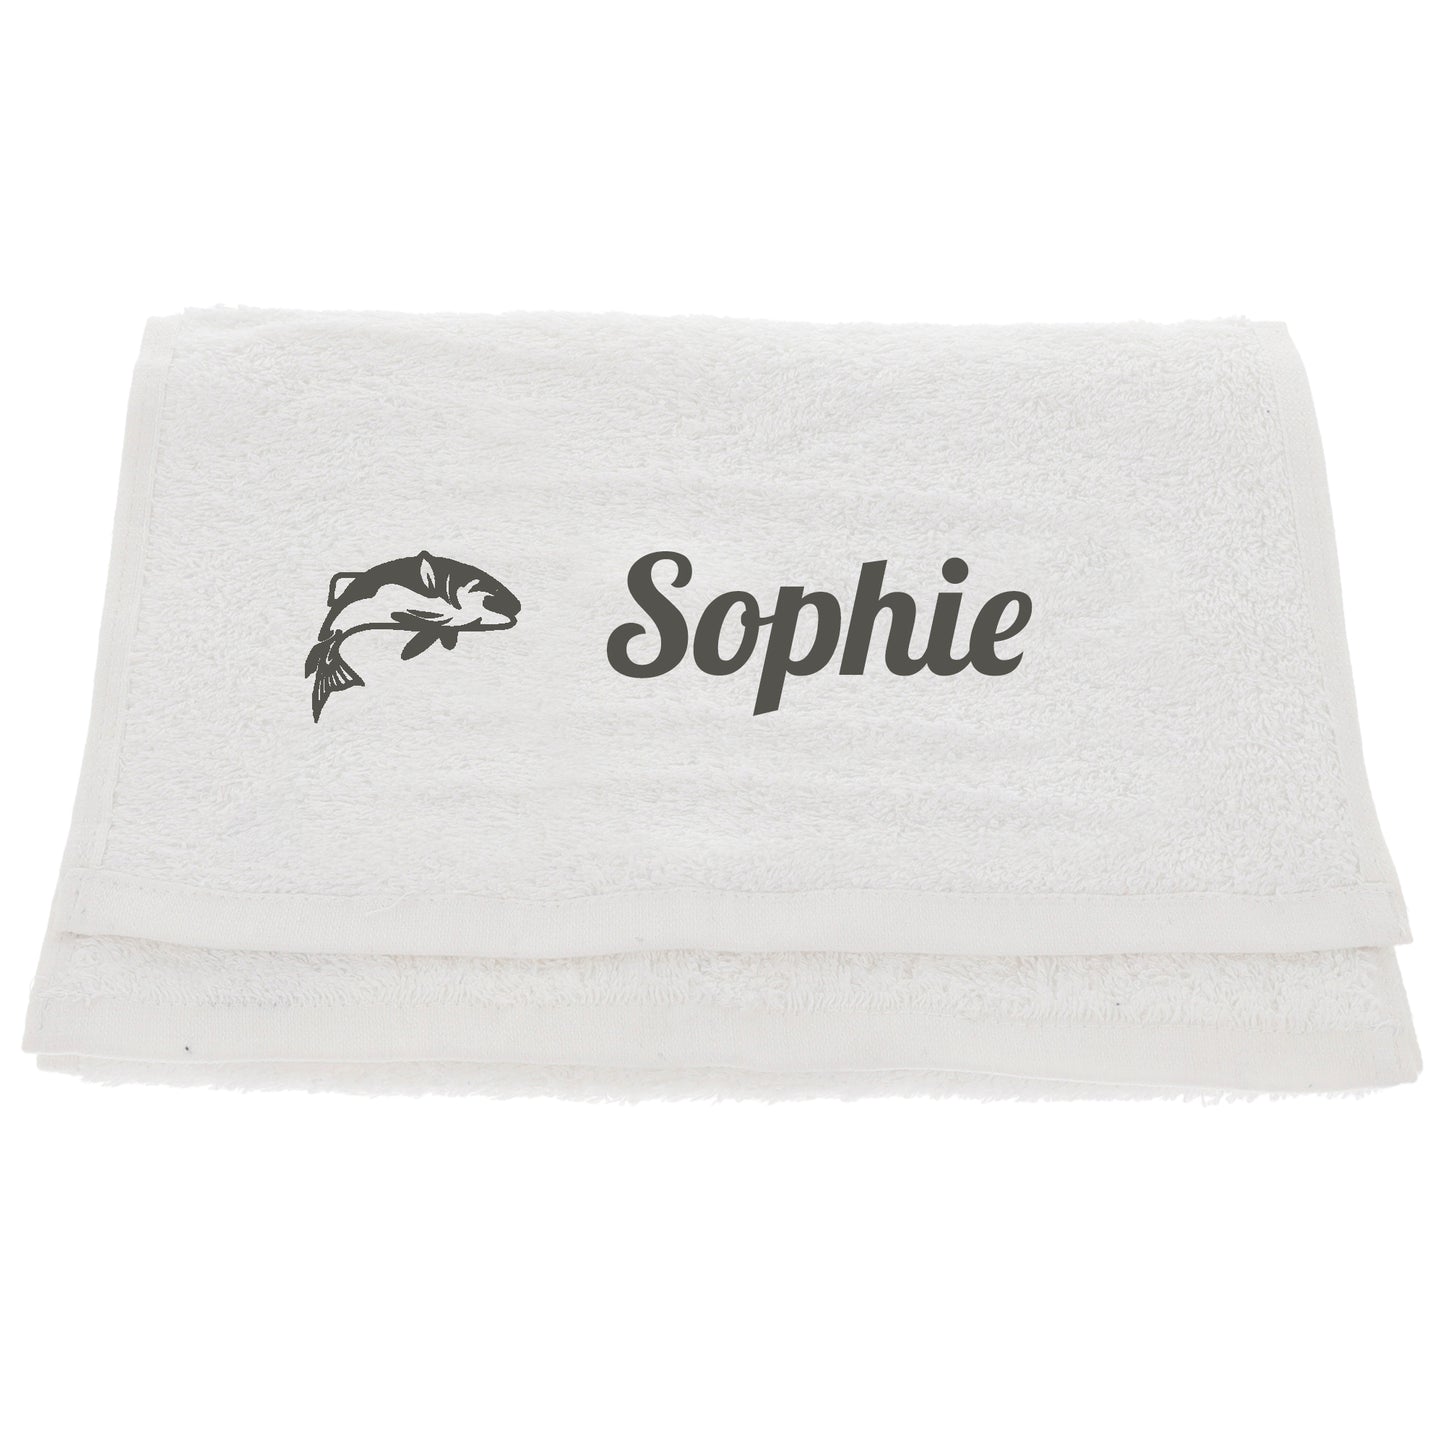 Personalised Embroidered Fishing Towel  - Always Looking Good - White  